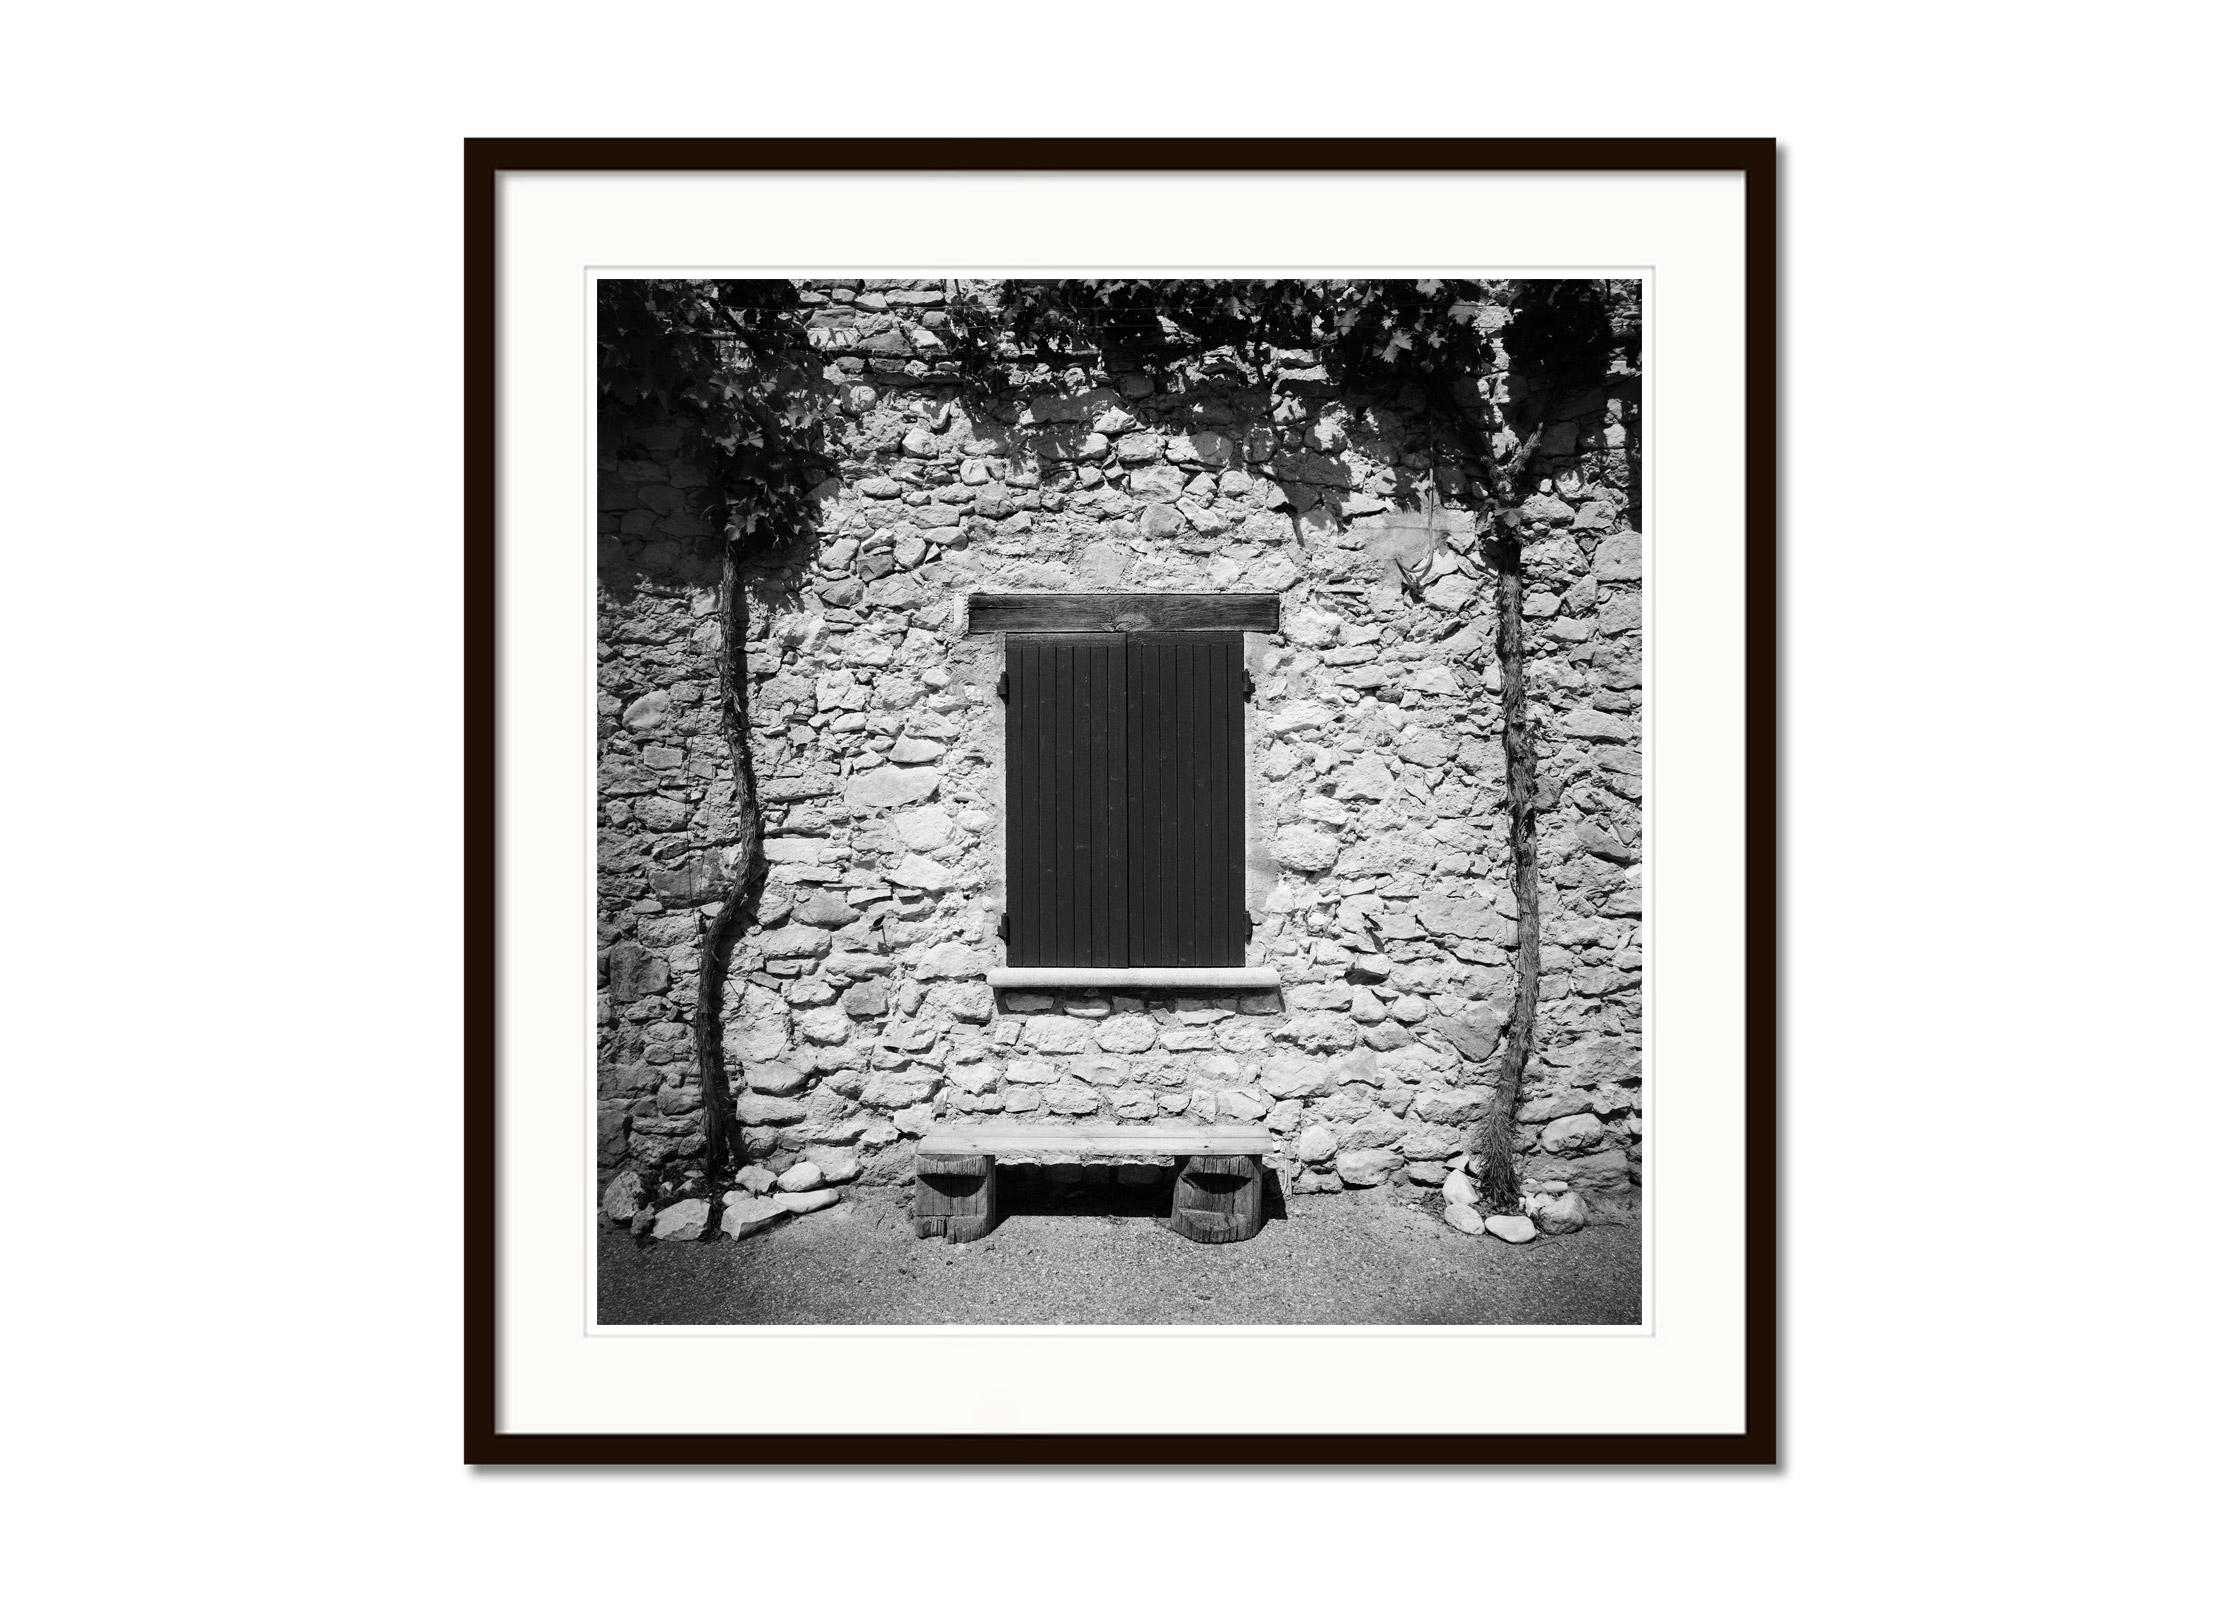 Omas Bench, stone House, France, black and white landscape, fine art photography - Contemporary Photograph by Gerald Berghammer